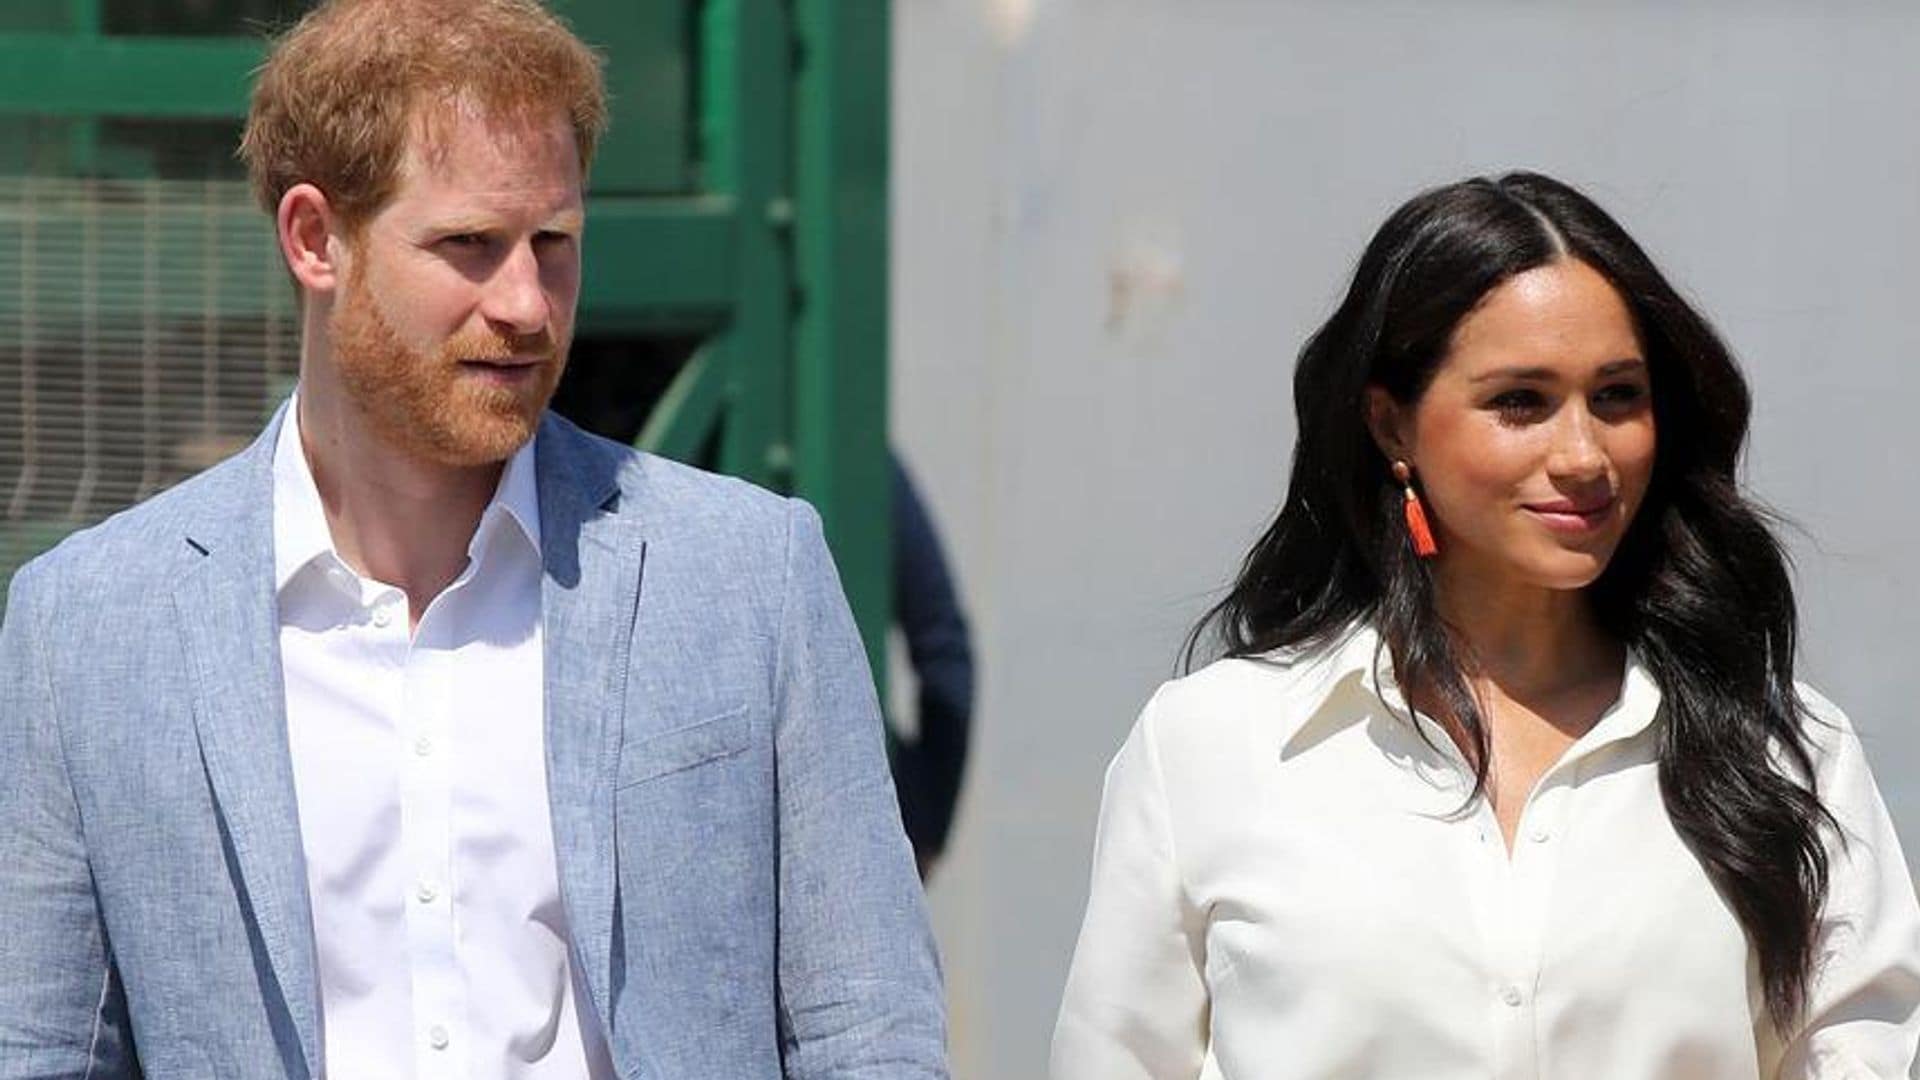 Meghan Markle and Prince Harry make first appearance after releasing statement